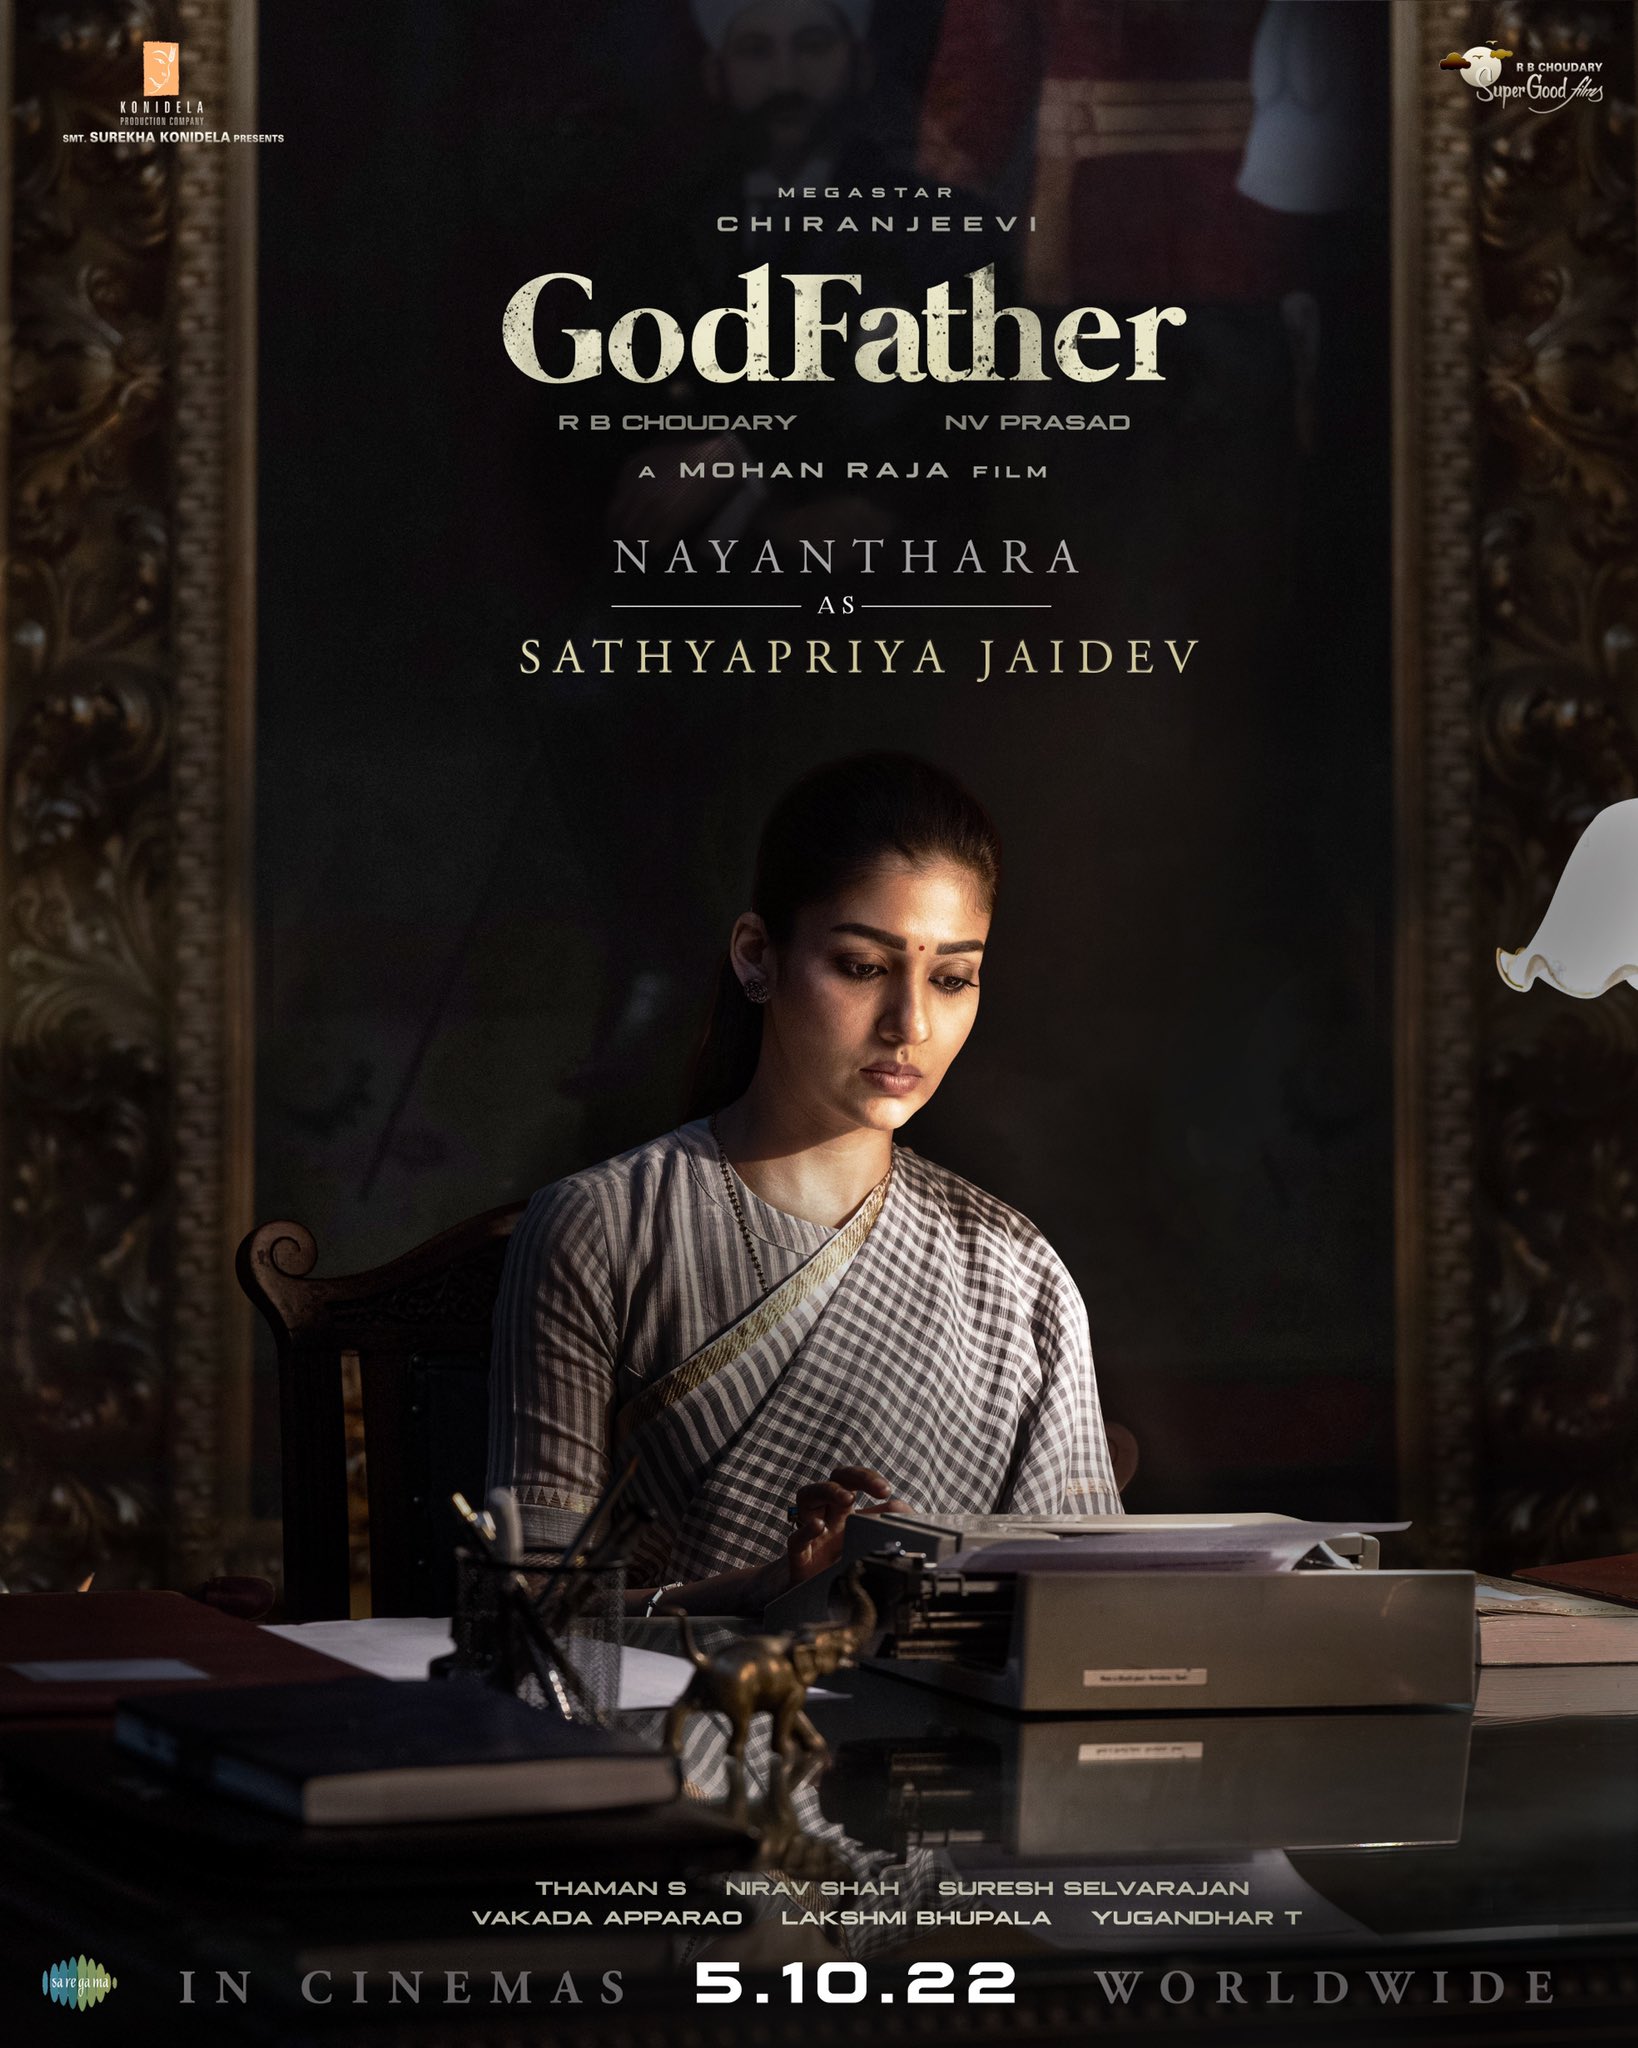 Nayanthara first look in 'Godfather'